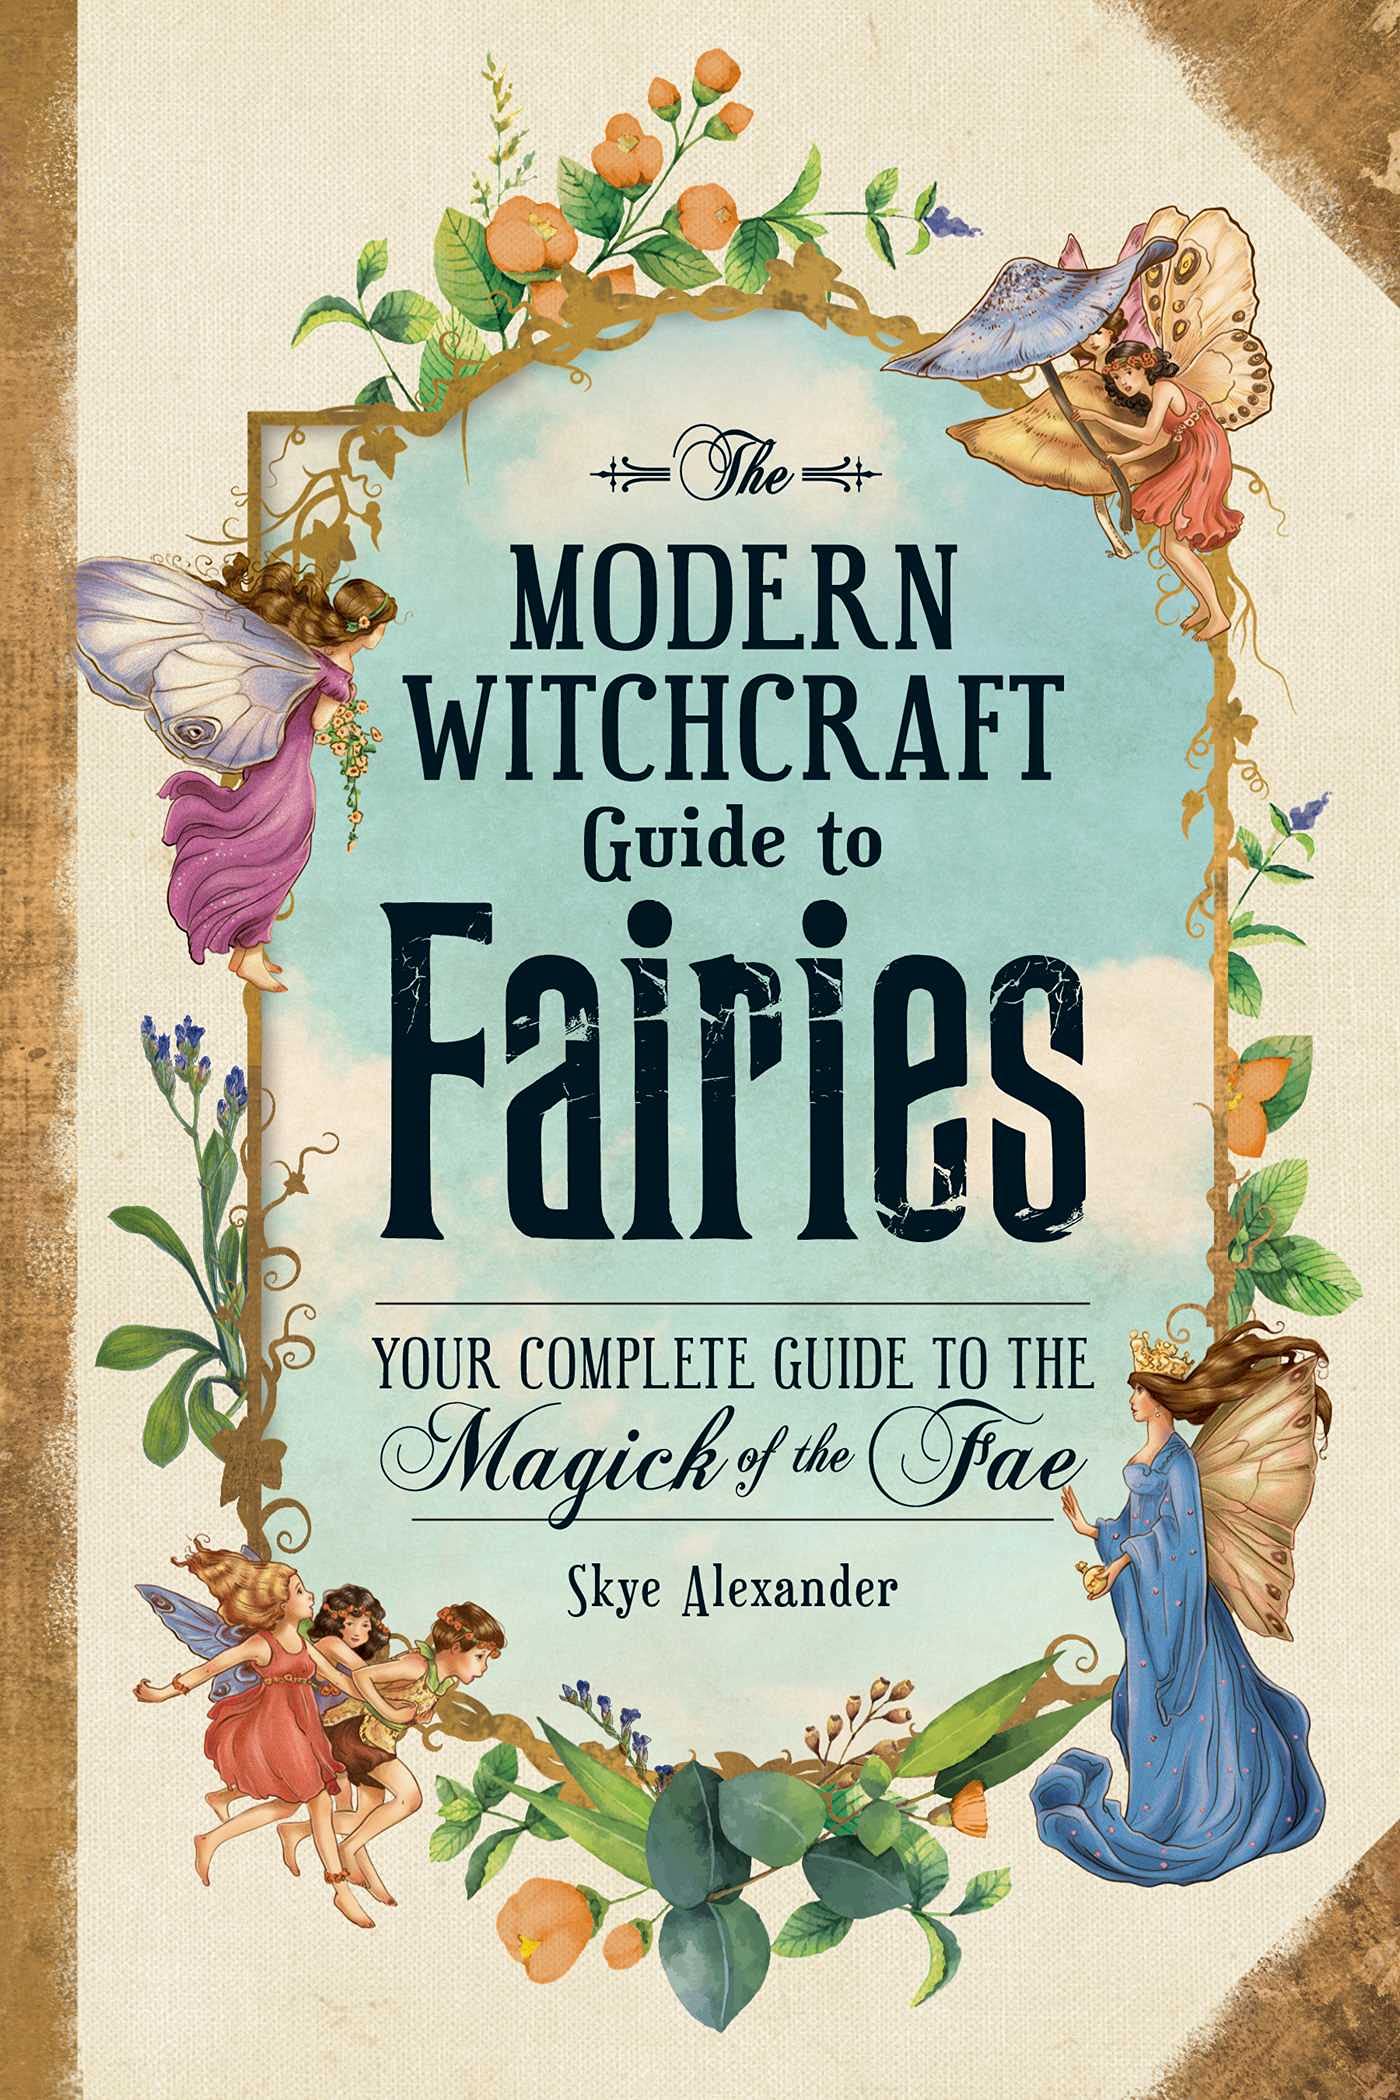 Modern Witchcraft Guide to Fairies: Your Complete Guide